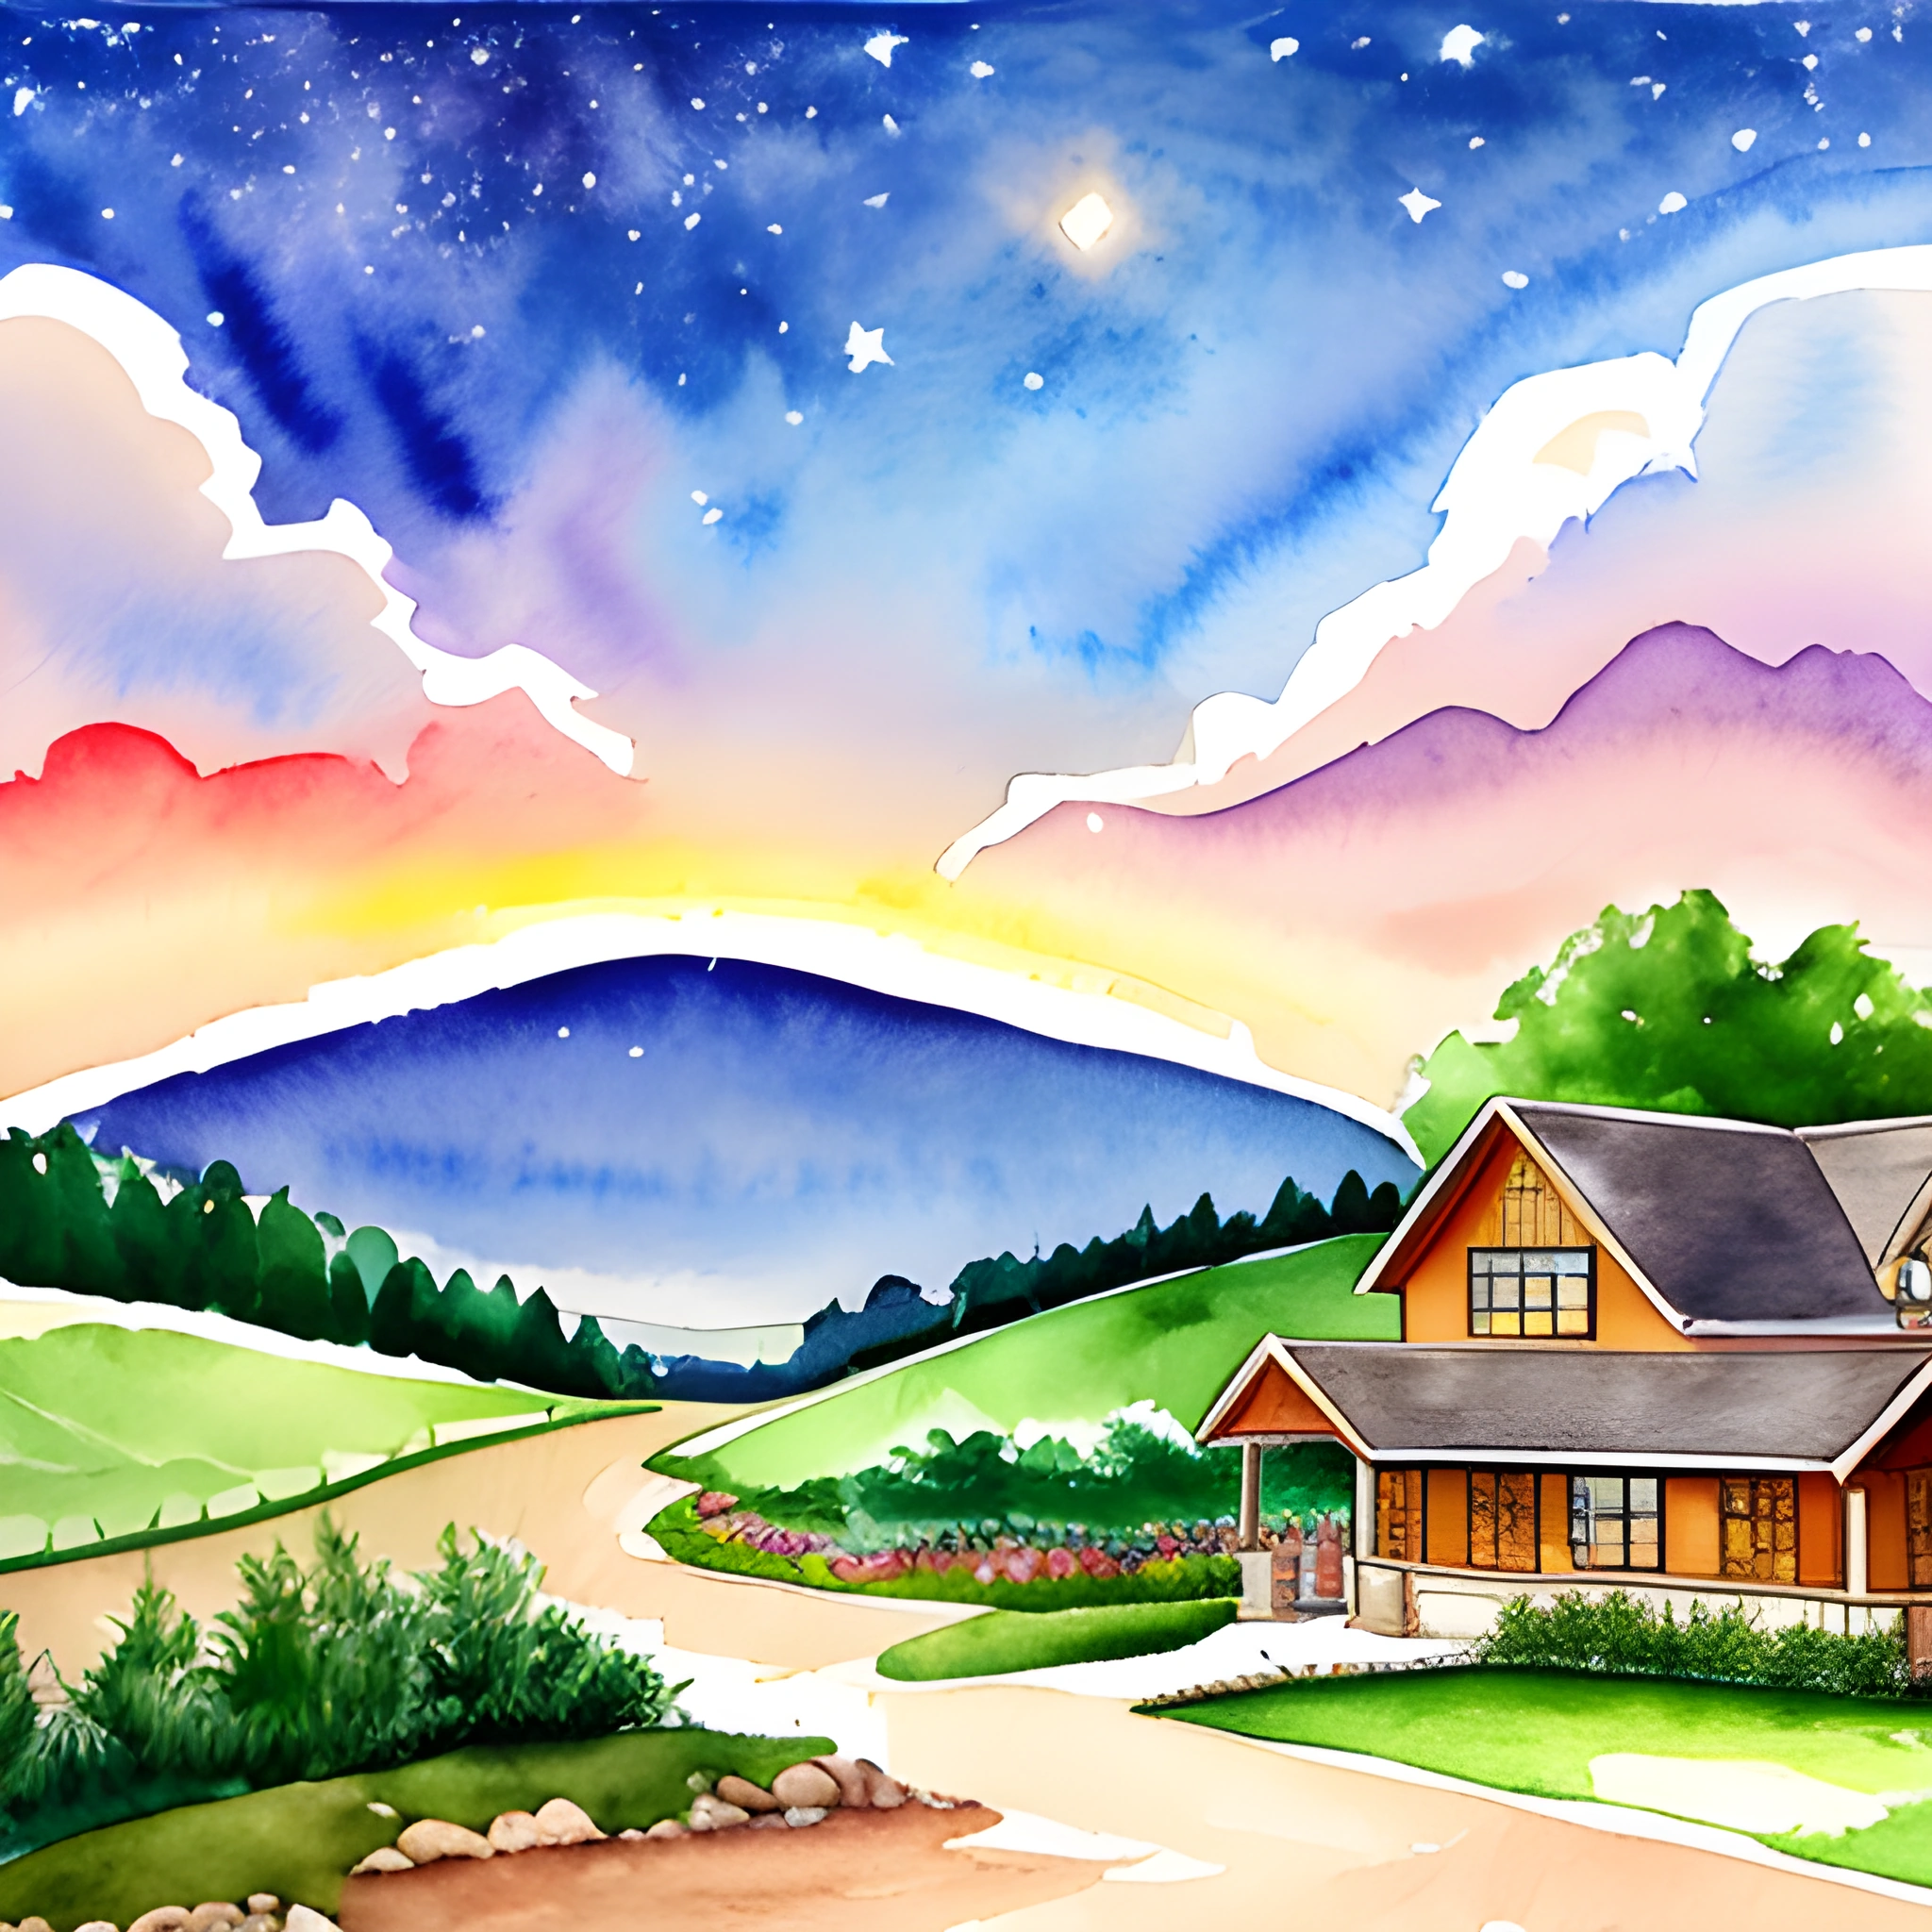 painting of a house in a rural area with a mountain in the background